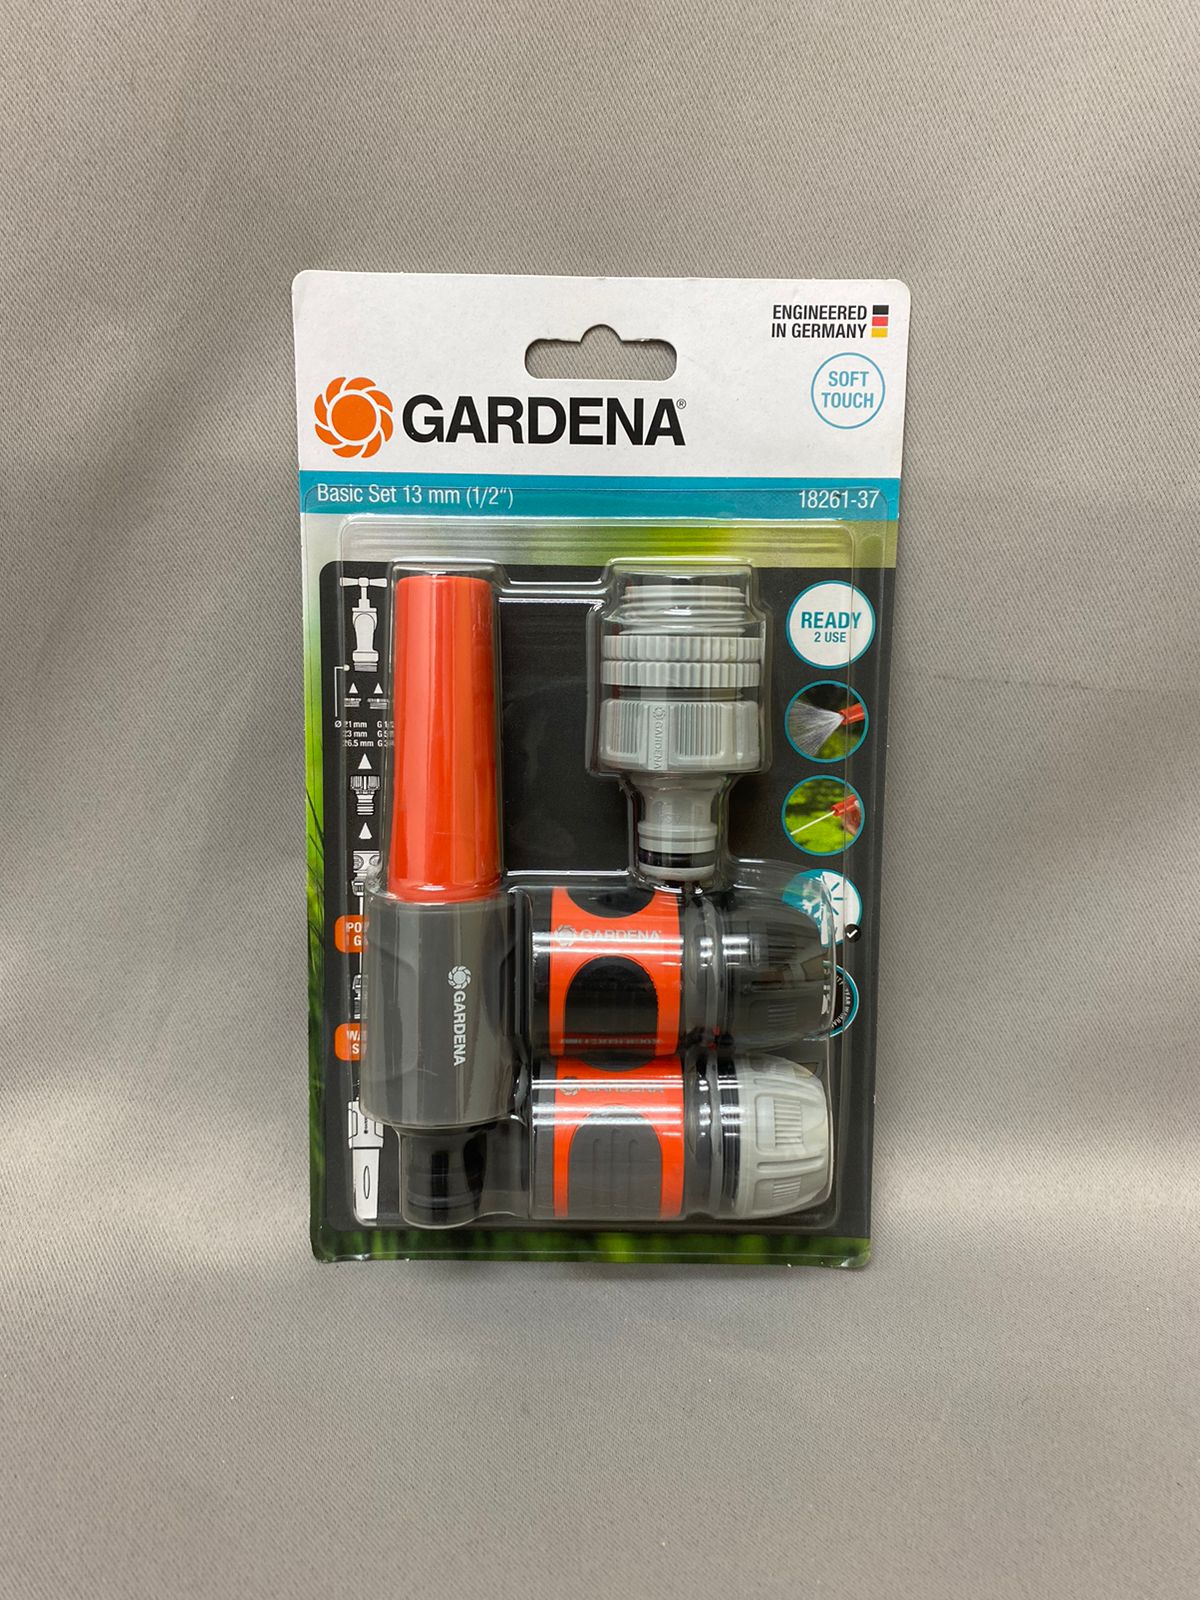 A Gardena brand tap connector set in retail packaging against a plain background.